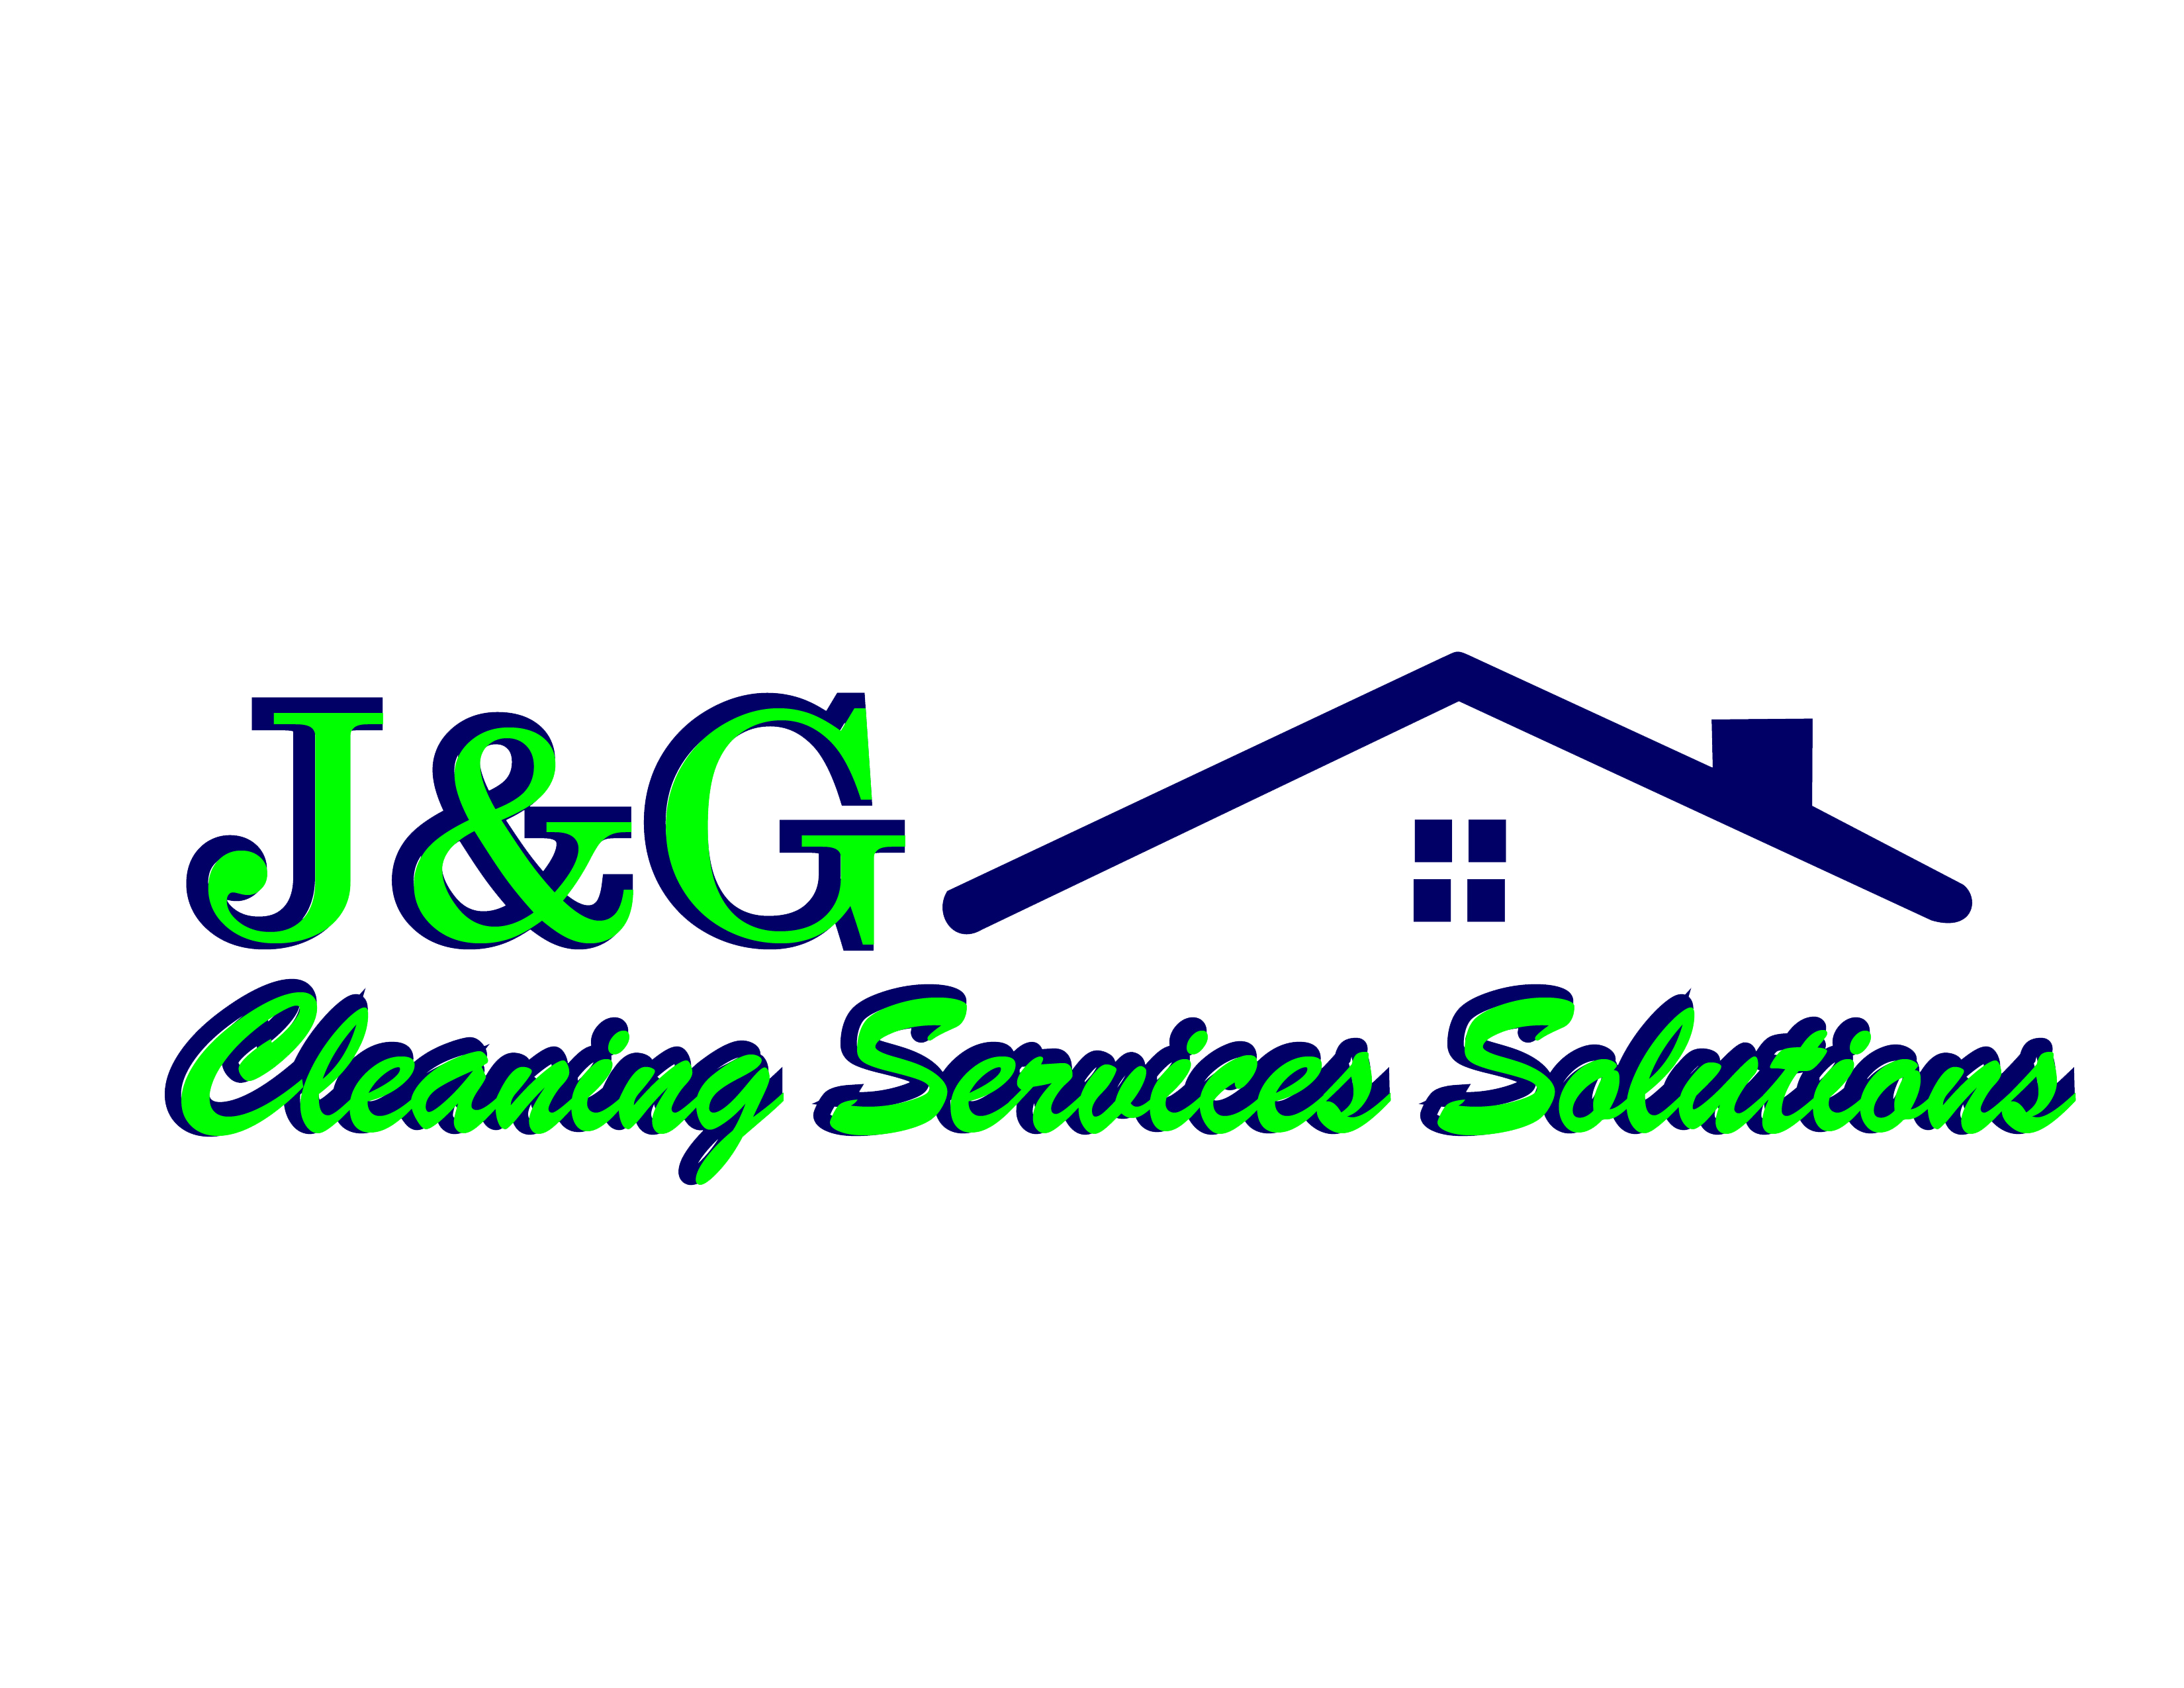 J & G Cleaning Services Solutions - Cleaning Services in Louisiana, Cleaning Services in LA, Cleaning Services in Abbeville Louisiana, Cleaning Services in Abbeville LA, Cleaning Services in Lafayette Louisiana, Cleaning Services in Lafayette LA, Cleaning Services in Maurice Louisiana, Cleaning Services in Maurice LA, Cleaning Services in Youngsville Louisiana, Cleaning Services in Youngsville LA, Cleaning Services in Broussard Louisiana, Cleaning Services in Broussard LA, Cleaning Services in Scott Louisiana, Cleaning Services in Scott LA, Cleaning Services in Carencro Louisiana, Cleaning Services in Carencro LA, Residential Cleaning Services in Louisiana, Residential Cleaning Services in LA, Residential Cleaning Services in Abbeville Louisiana, Residential Cleaning Services in Abbeville LA, Residential Cleaning Services in Lafayette Louisiana, Residential Cleaning Services in Lafayette LA, Residential Cleaning Services in Maurice Louisiana, Residential Cleaning Services in Maurice LA, Residential Cleaning Services in Youngsville Louisiana, Residential Cleaning Services in Youngsville LA, Residential Cleaning Services in Broussard Louisiana, Residential Cleaning Services in Broussard LA, Residential Cleaning Services in Scott Louisiana, Residential Cleaning Services in Scott LA, Residential Cleaning Services in Carencro Louisiana, Residential Cleaning Services in Carencro LA, House Cleaning Services in Louisiana, House Cleaning Services in LA, House Cleaning Services in Abbeville Louisiana, House Cleaning Services in Abbeville LA, House Cleaning Services in Lafayette Louisiana, House Cleaning Services in Lafayette LA, House Cleaning Services in Maurice Louisiana, House Cleaning Services in Maurice LA, House Cleaning Services in Youngsville Louisiana, House Cleaning Services in Youngsville LA, House Cleaning Services in Broussard Louisiana, House Cleaning Services in Broussard LA, House Cleaning Services in Scott Louisiana, House Cleaning Services in Scott LA, House Cleaning Services in Carencro Louisiana, House Cleaning Services in Carencro LA, Deep Cleaning Services in Louisiana, Deep Cleaning Services in LA, Deep Cleaning Services in Abbeville Louisiana, Deep Cleaning Services in Abbeville LA, Deep Cleaning Services in Lafayette Louisiana, Deep Cleaning Services in Lafayette LA, Deep Cleaning Services in Maurice Louisiana, Deep Cleaning Services in Maurice LA, Deep Cleaning Services in Youngsville Louisiana, Deep Cleaning Services in Youngsville LA, Deep Cleaning Services in Broussard Louisiana, Deep Cleaning Services in Broussard LA, Deep Cleaning Services in Scott Louisiana, Deep Cleaning Services in Scott LA, Deep Cleaning Services in Carencro Louisiana, Deep Cleaning Services in Carencro LA, Move out move in Cleaning Services in Louisiana, Move out move in Cleaning Services in LA, Move out move in Cleaning Services in Abbeville Louisiana, Move out move in Cleaning Services in Abbeville LA, Move out move in Cleaning Services in Lafayette Louisiana, Move out move in Cleaning Services in Lafayette LA, Move out move in Cleaning Services in Maurice Louisiana, Move out move in Cleaning Services in Maurice LA, Move out move in Cleaning Services in Youngsville Louisiana, Move out move in Cleaning Services in Youngsville LA, Move out move in Cleaning Services in Broussard Louisiana, Move out move in Cleaning Services in Broussard LA, Move out move in Cleaning Services in Scott Louisiana, Move out move in Cleaning Services in Scott LA, Move out move in Cleaning Services in Carencro Louisiana, Move out move in Cleaning Services in Carencro LA, Office Cleaning Services in Louisiana, Office Cleaning Services in LA, Office Cleaning Services in Abbeville Louisiana, Office Cleaning Services in Abbeville LA, Office Cleaning Services in Lafayette Louisiana, Office Cleaning Services in Lafayette LA, Office Cleaning Services in Maurice Louisiana, Office Cleaning Services in Maurice LA, Office Cleaning Services in Youngsville Louisiana, Office Cleaning Services in Youngsville LA, Office Cleaning Services in Broussard Louisiana, Office Cleaning Services in Broussard LA, Office Cleaning Services in Scott Louisiana, Office Cleaning Services in Scott LA, Office Cleaning Services in Carencro Louisiana, Office Cleaning Services in Carencro LA